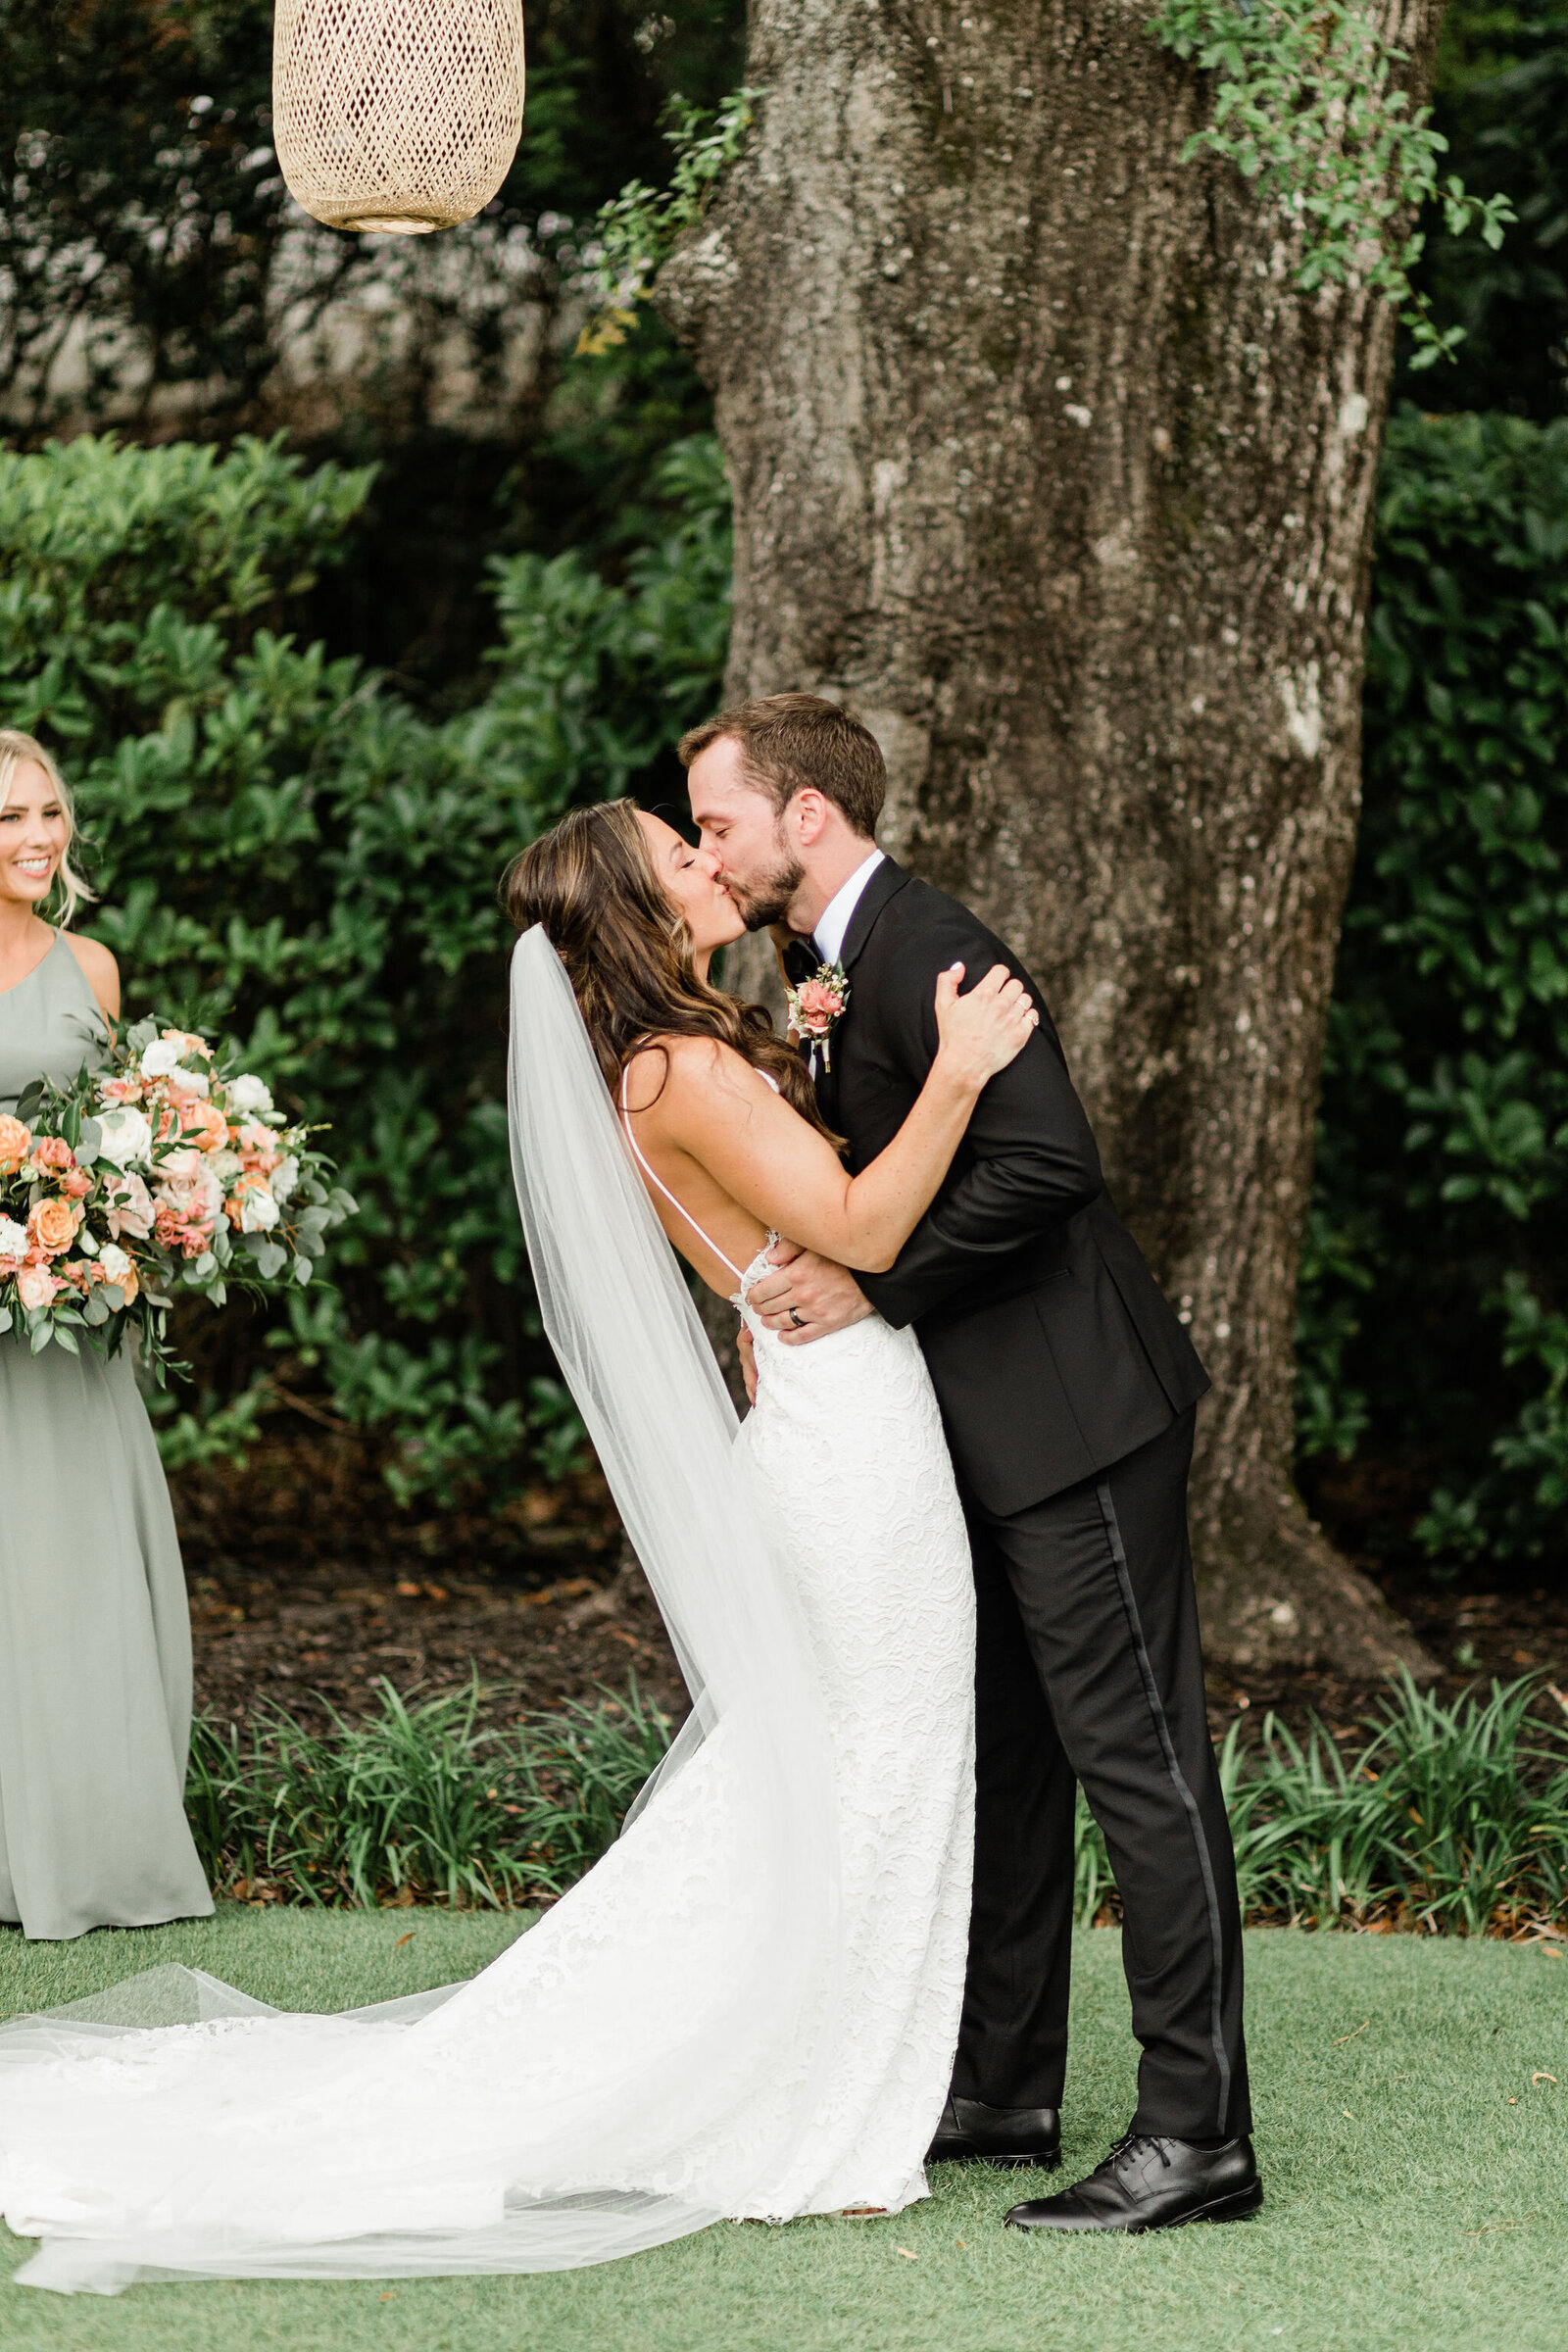 First Kiss | Wrightsville Manor, Wrightsville Beach NC | The Axtells Photo and Film